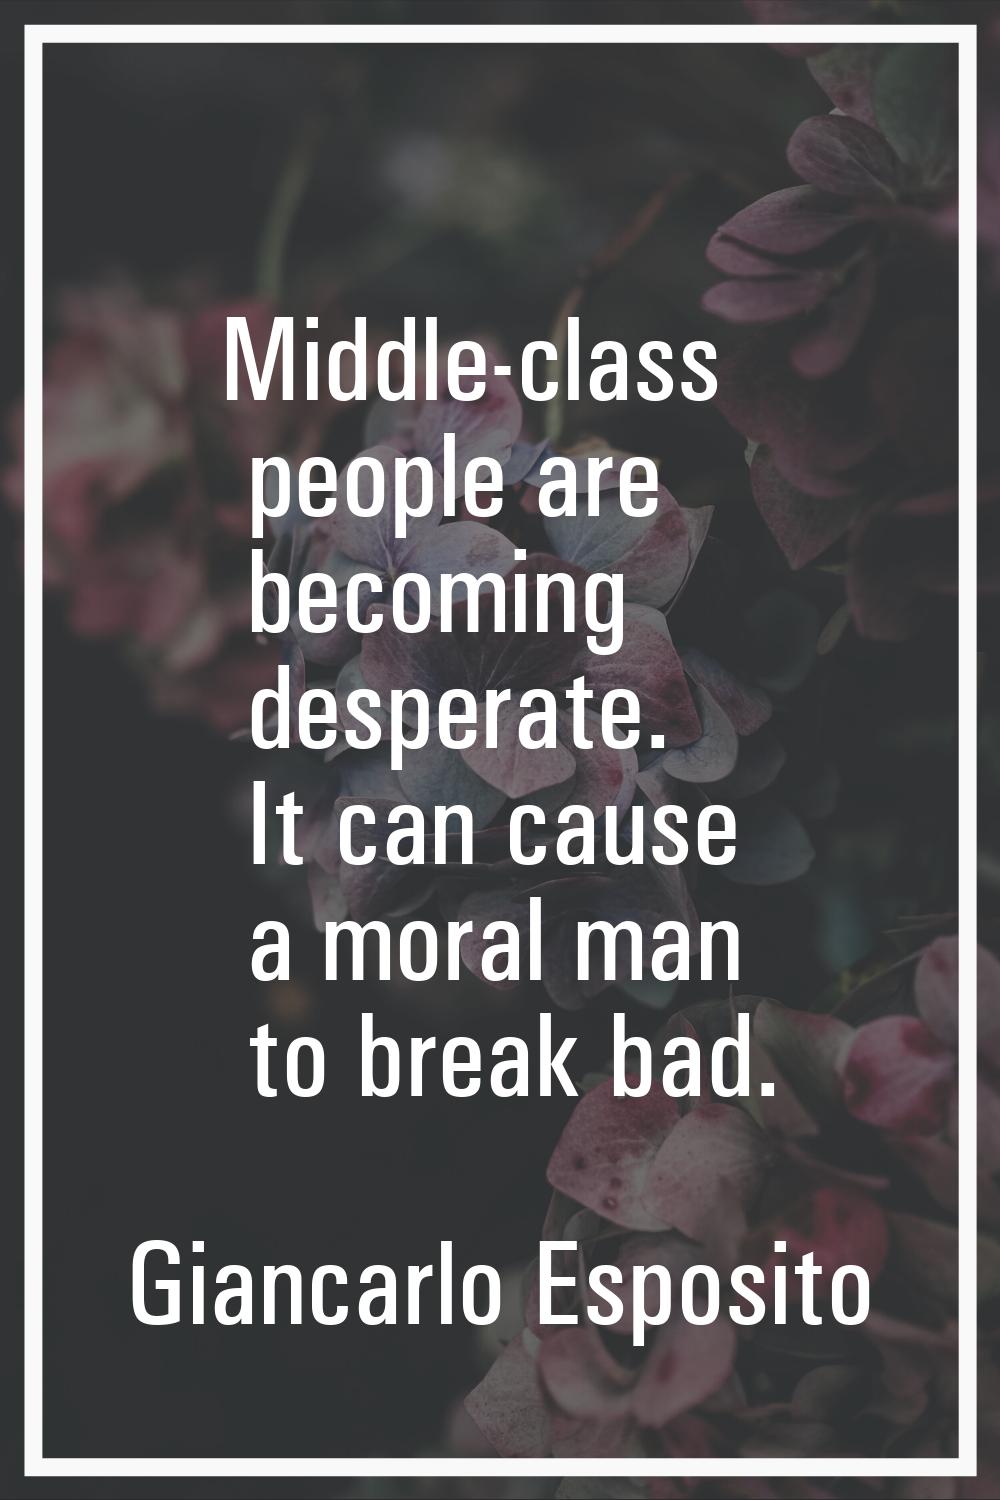 Middle-class people are becoming desperate. It can cause a moral man to break bad.